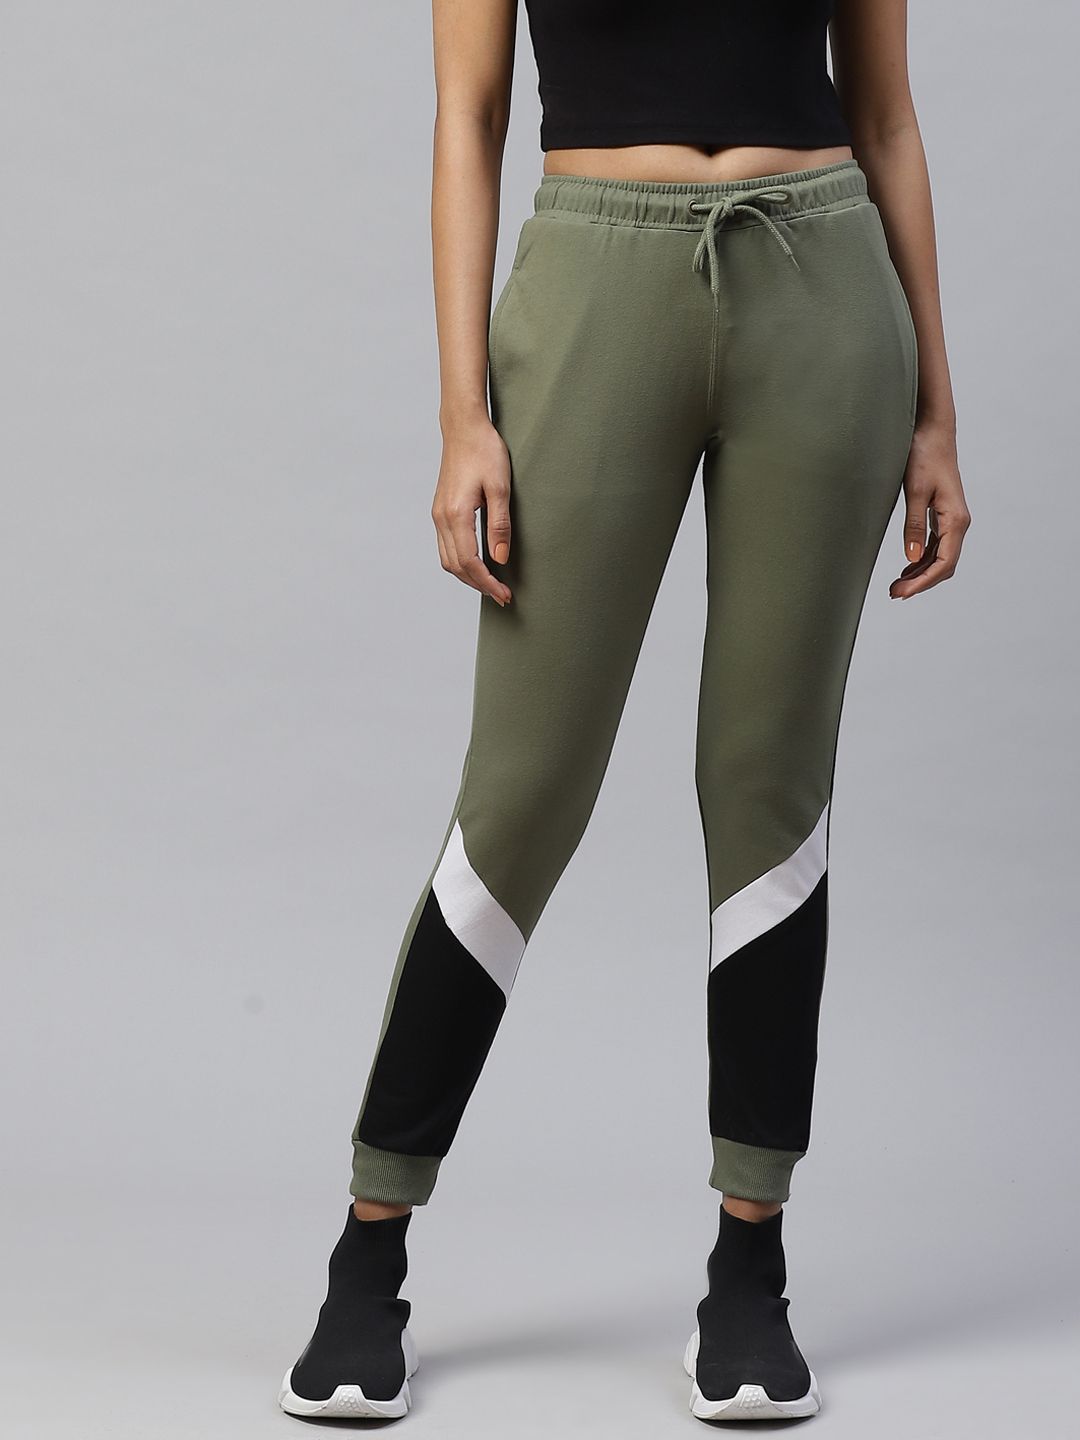 M7 by Metronaut Women Olive Green & Black Colourblocked Slim Fit Joggers Price in India